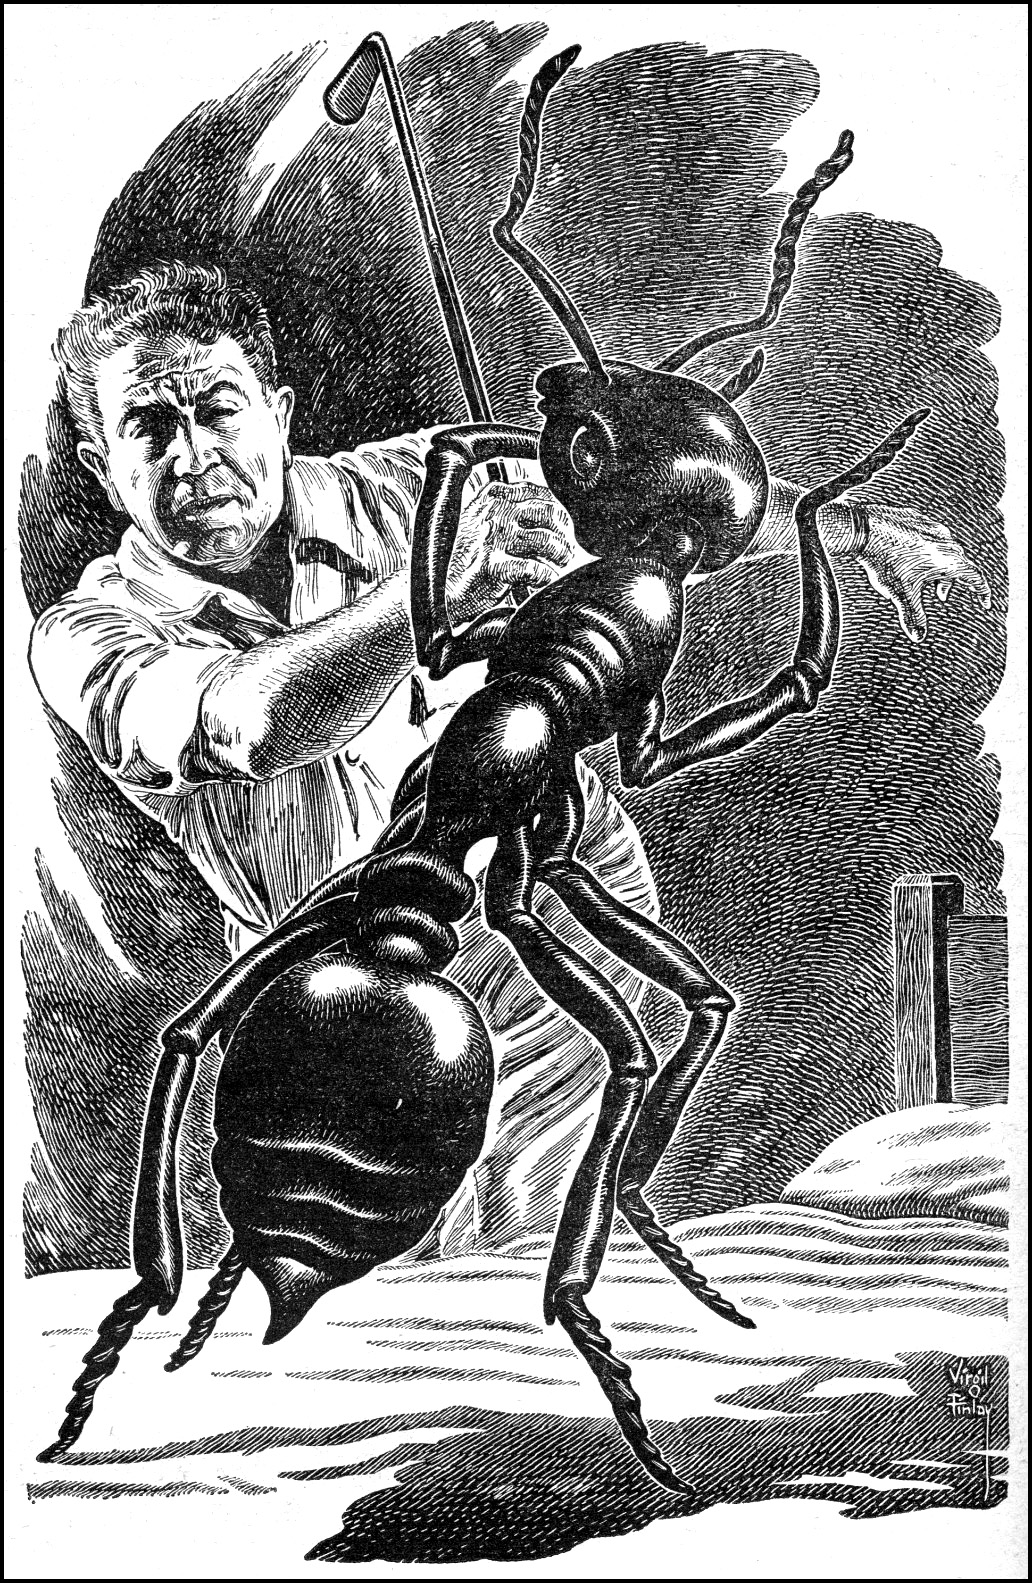 Virgil Finlay, "The Large Ant"